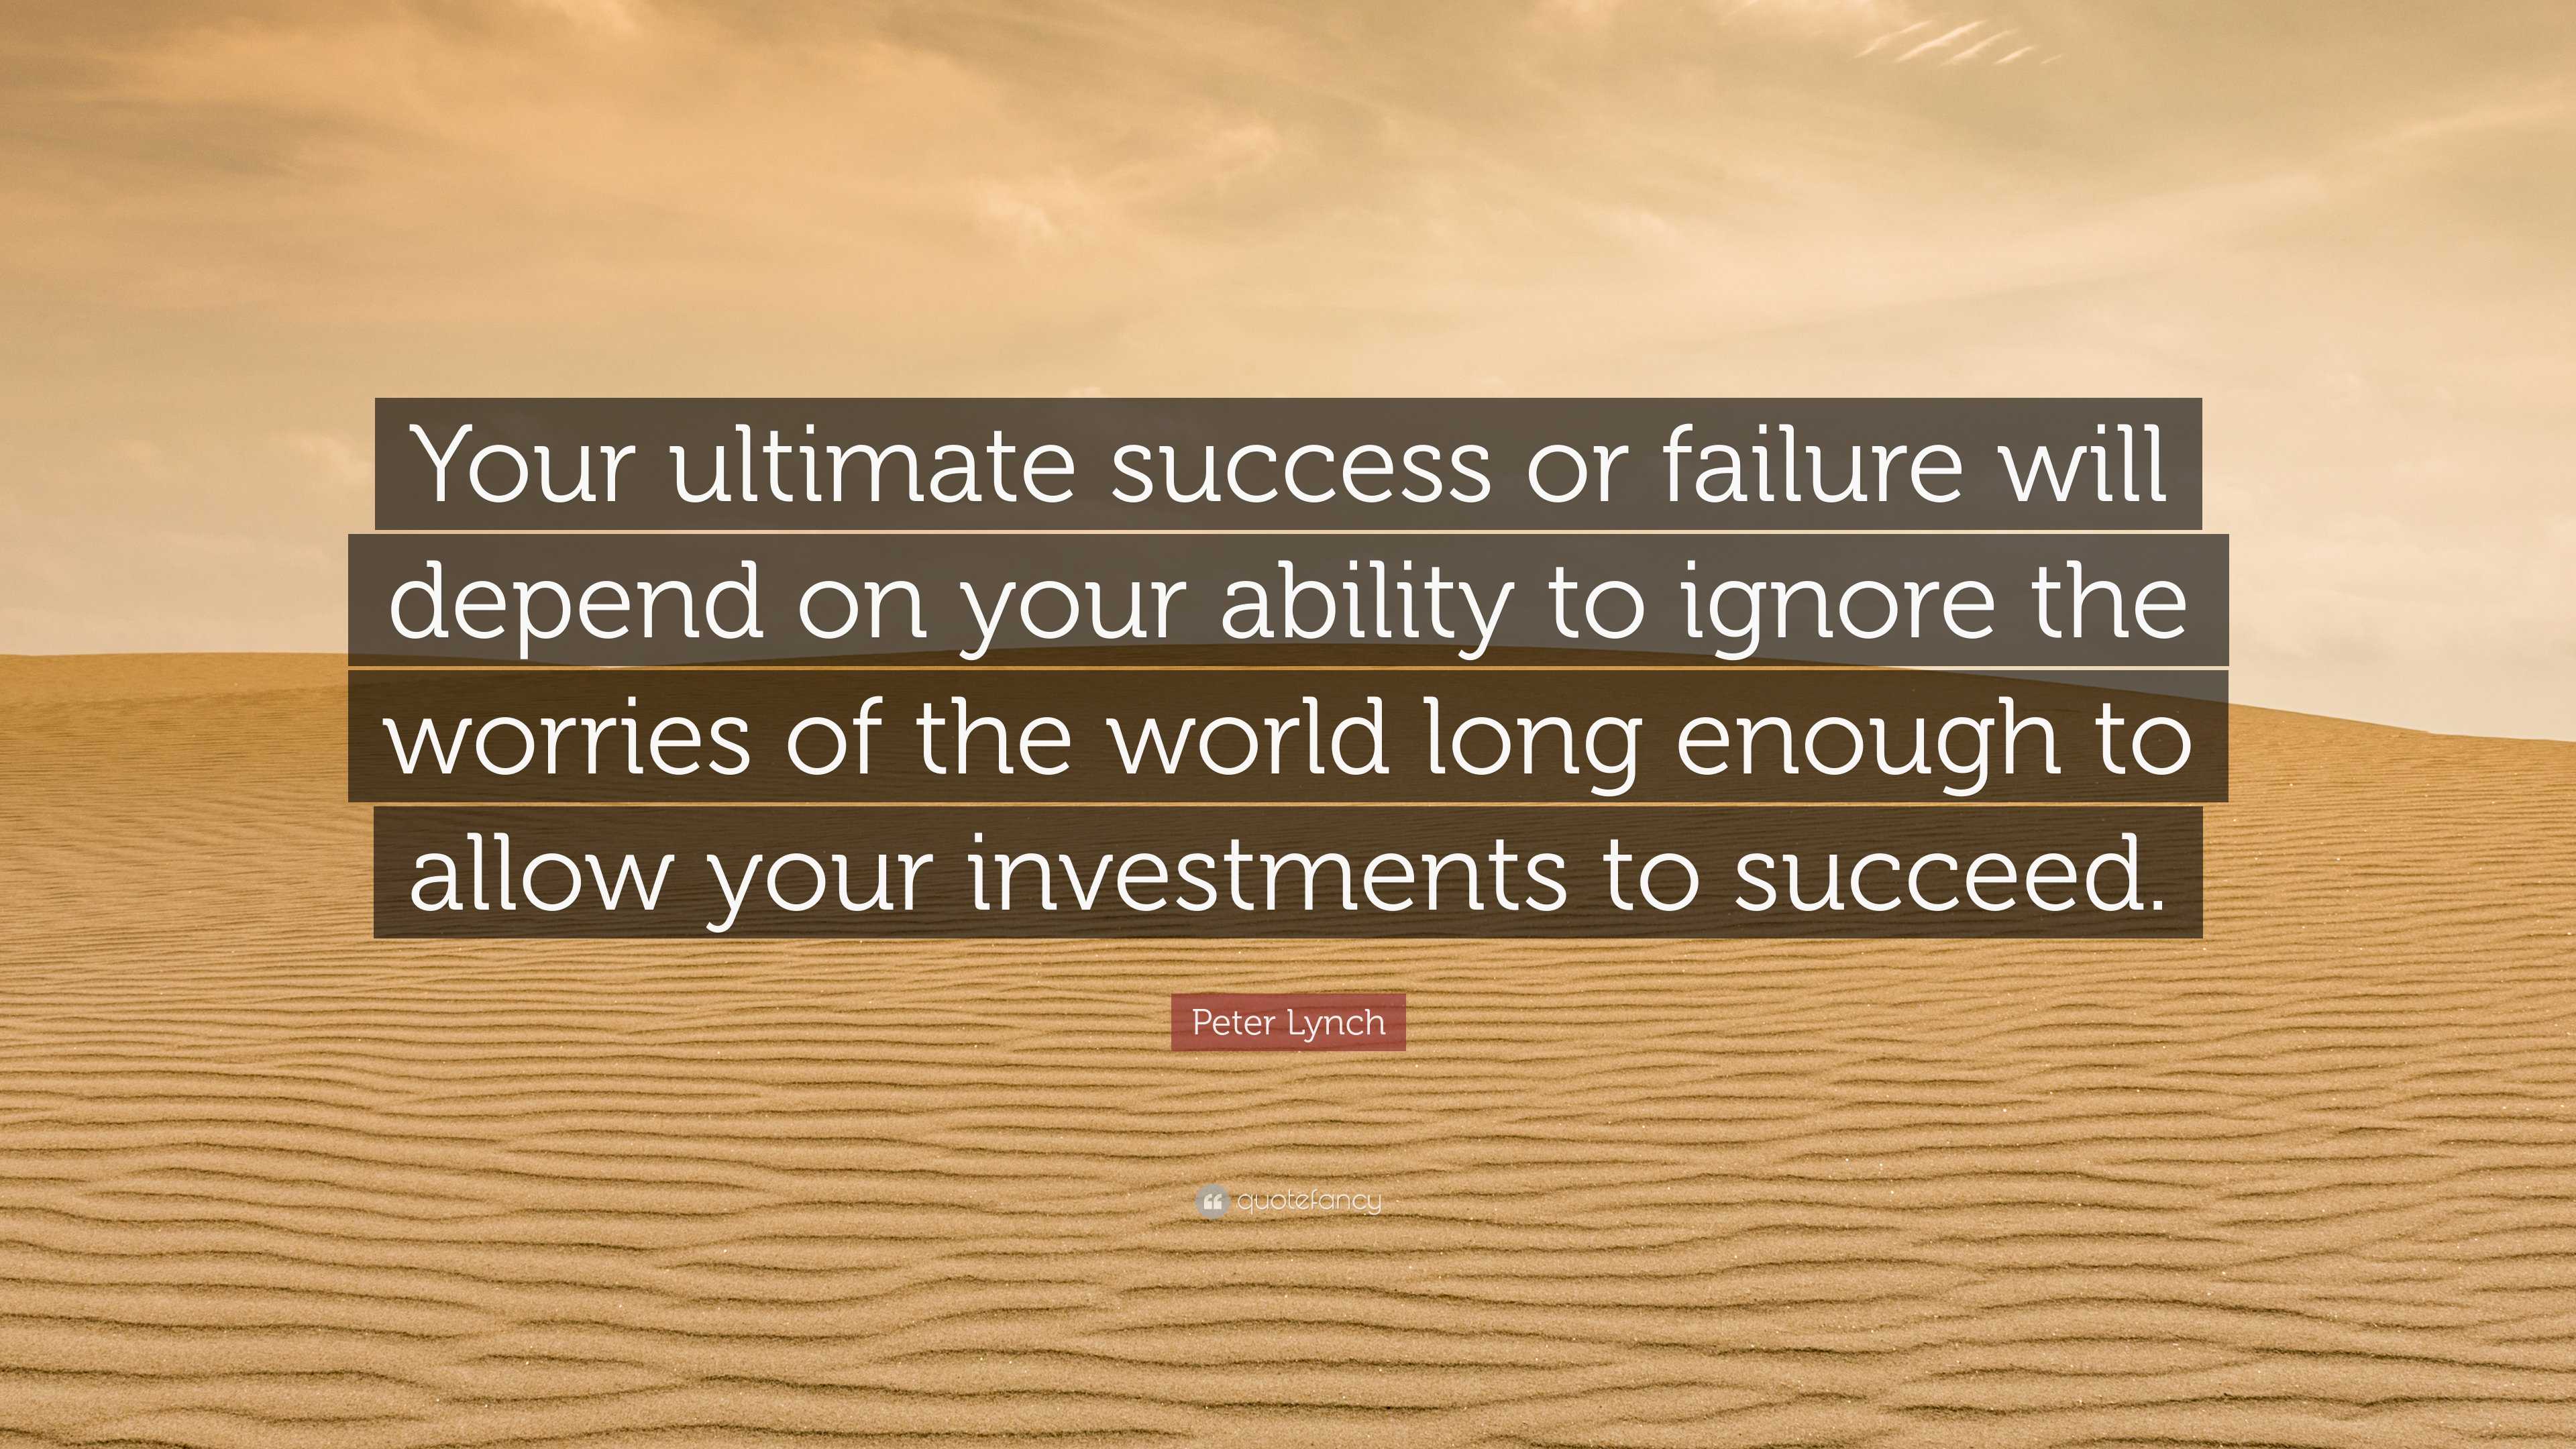 Peter Lynch Quote: “Your ultimate success or failure will depend